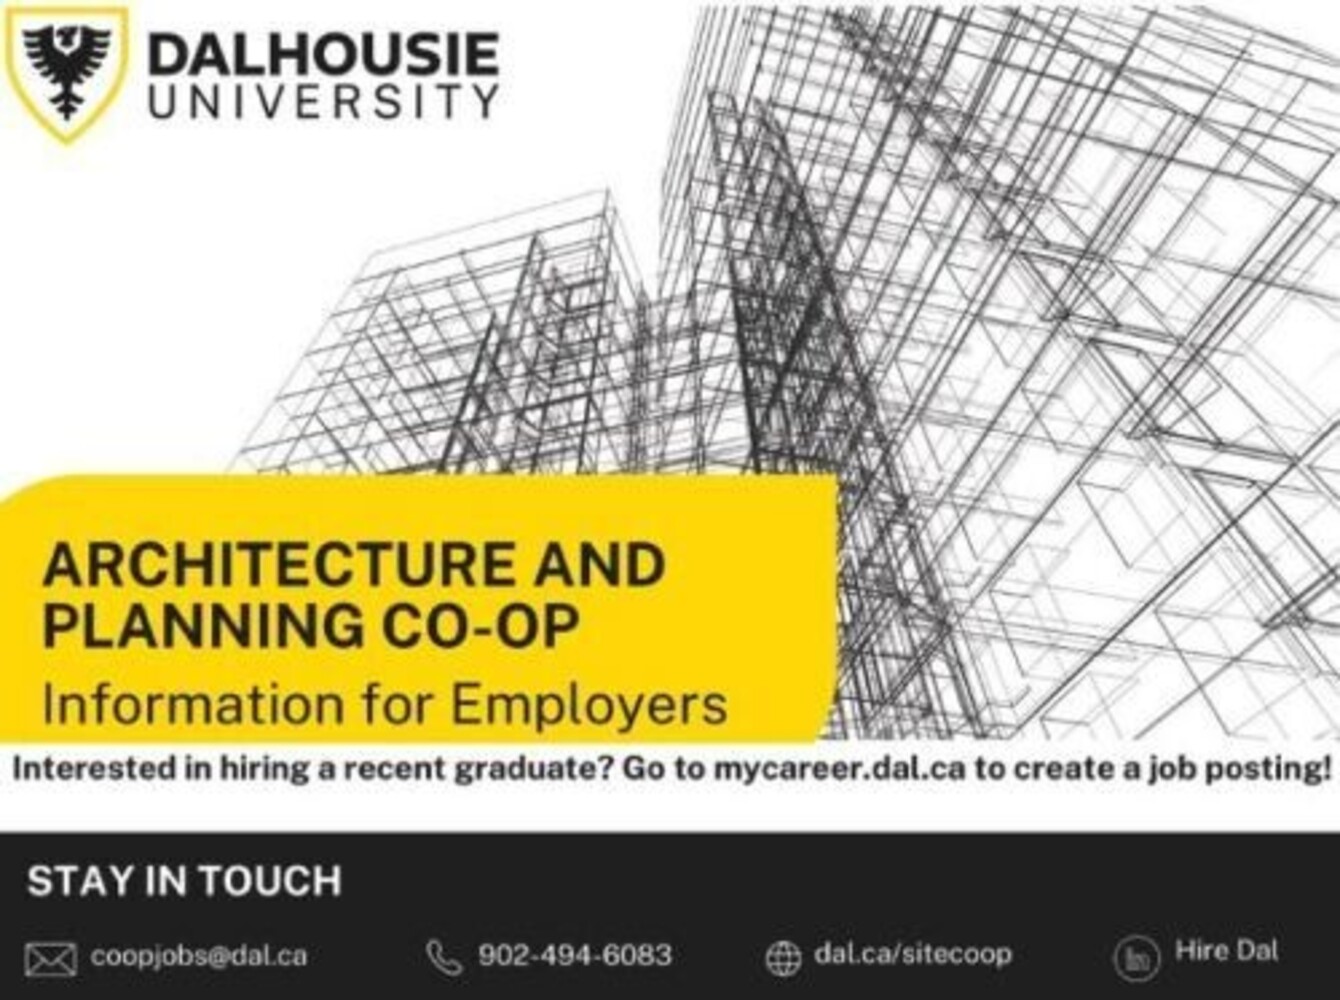 Dalhousie University: Architecture and Planning Co-op 